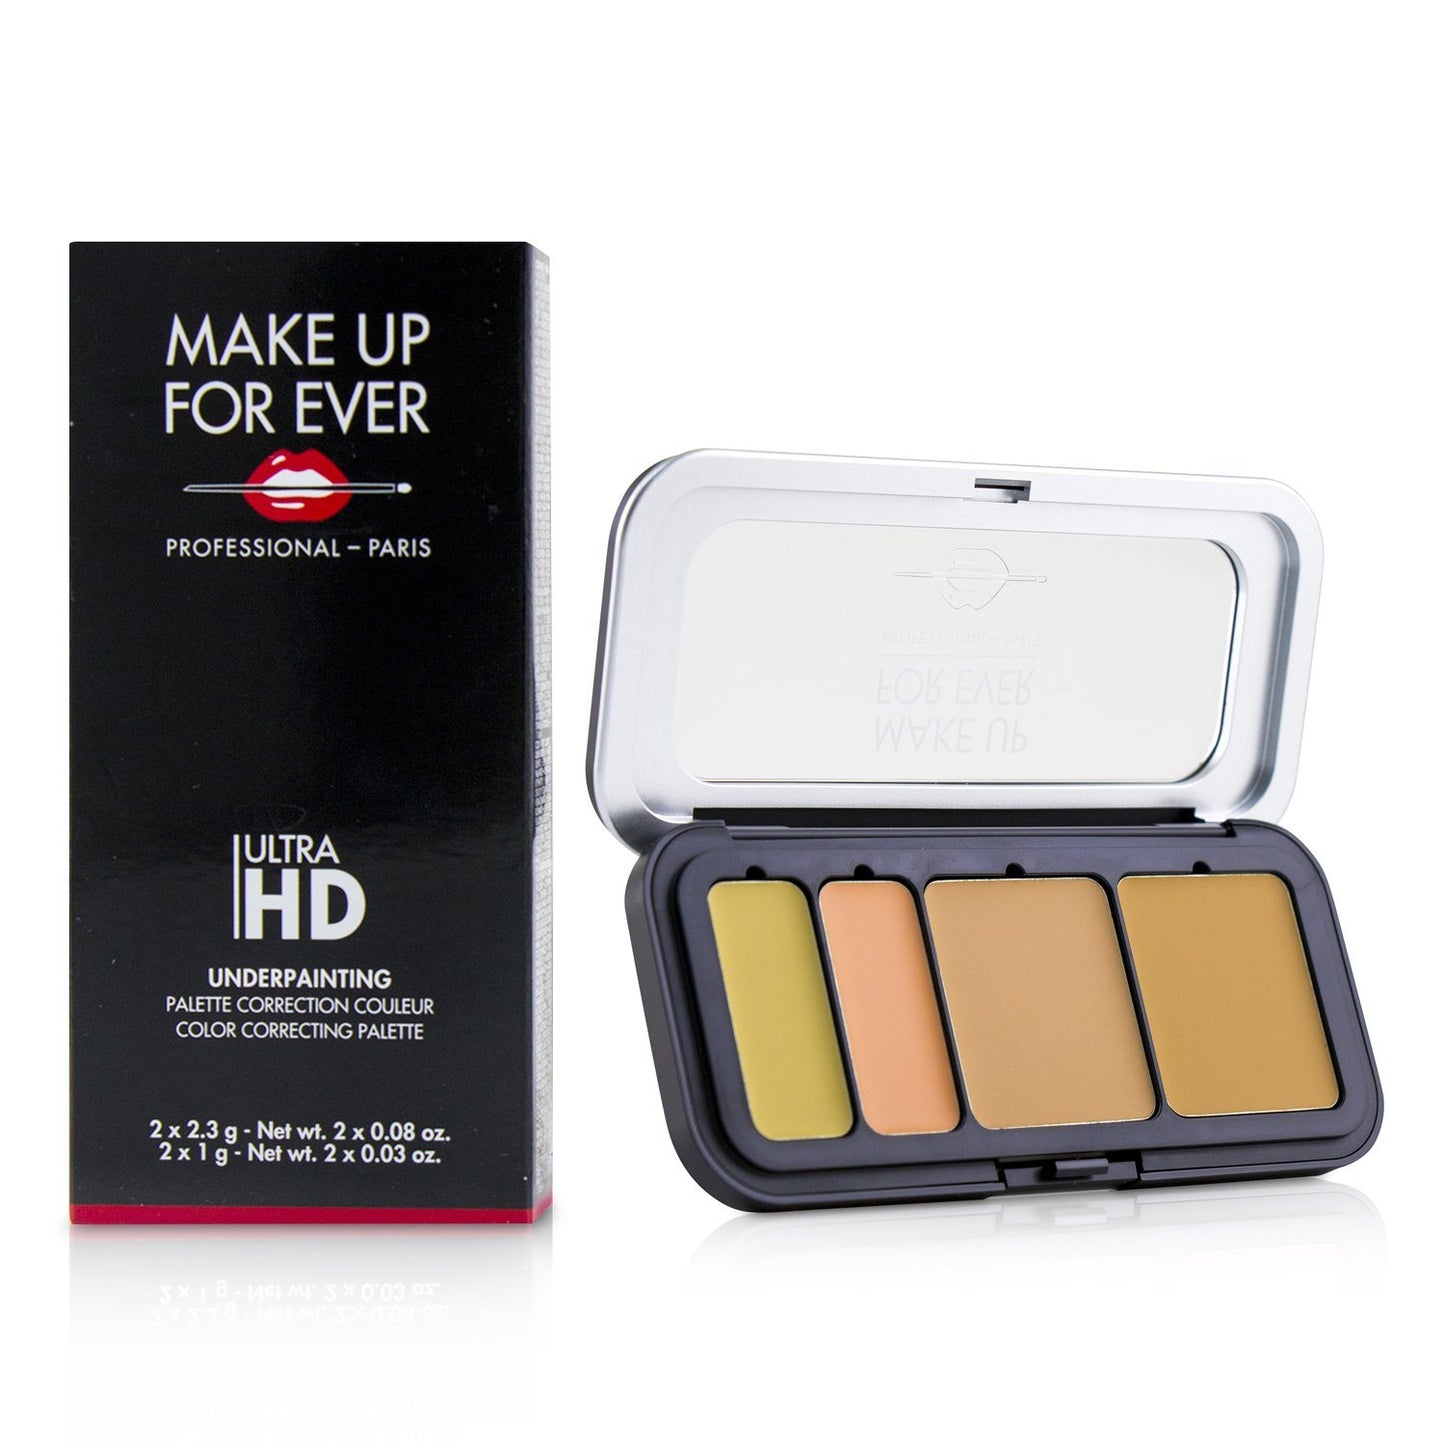 MAKE UP FOR EVER - Ultra HD Underpainting Color Correcting Palette - # 30 Medium 10030 6.6g/0.23oz